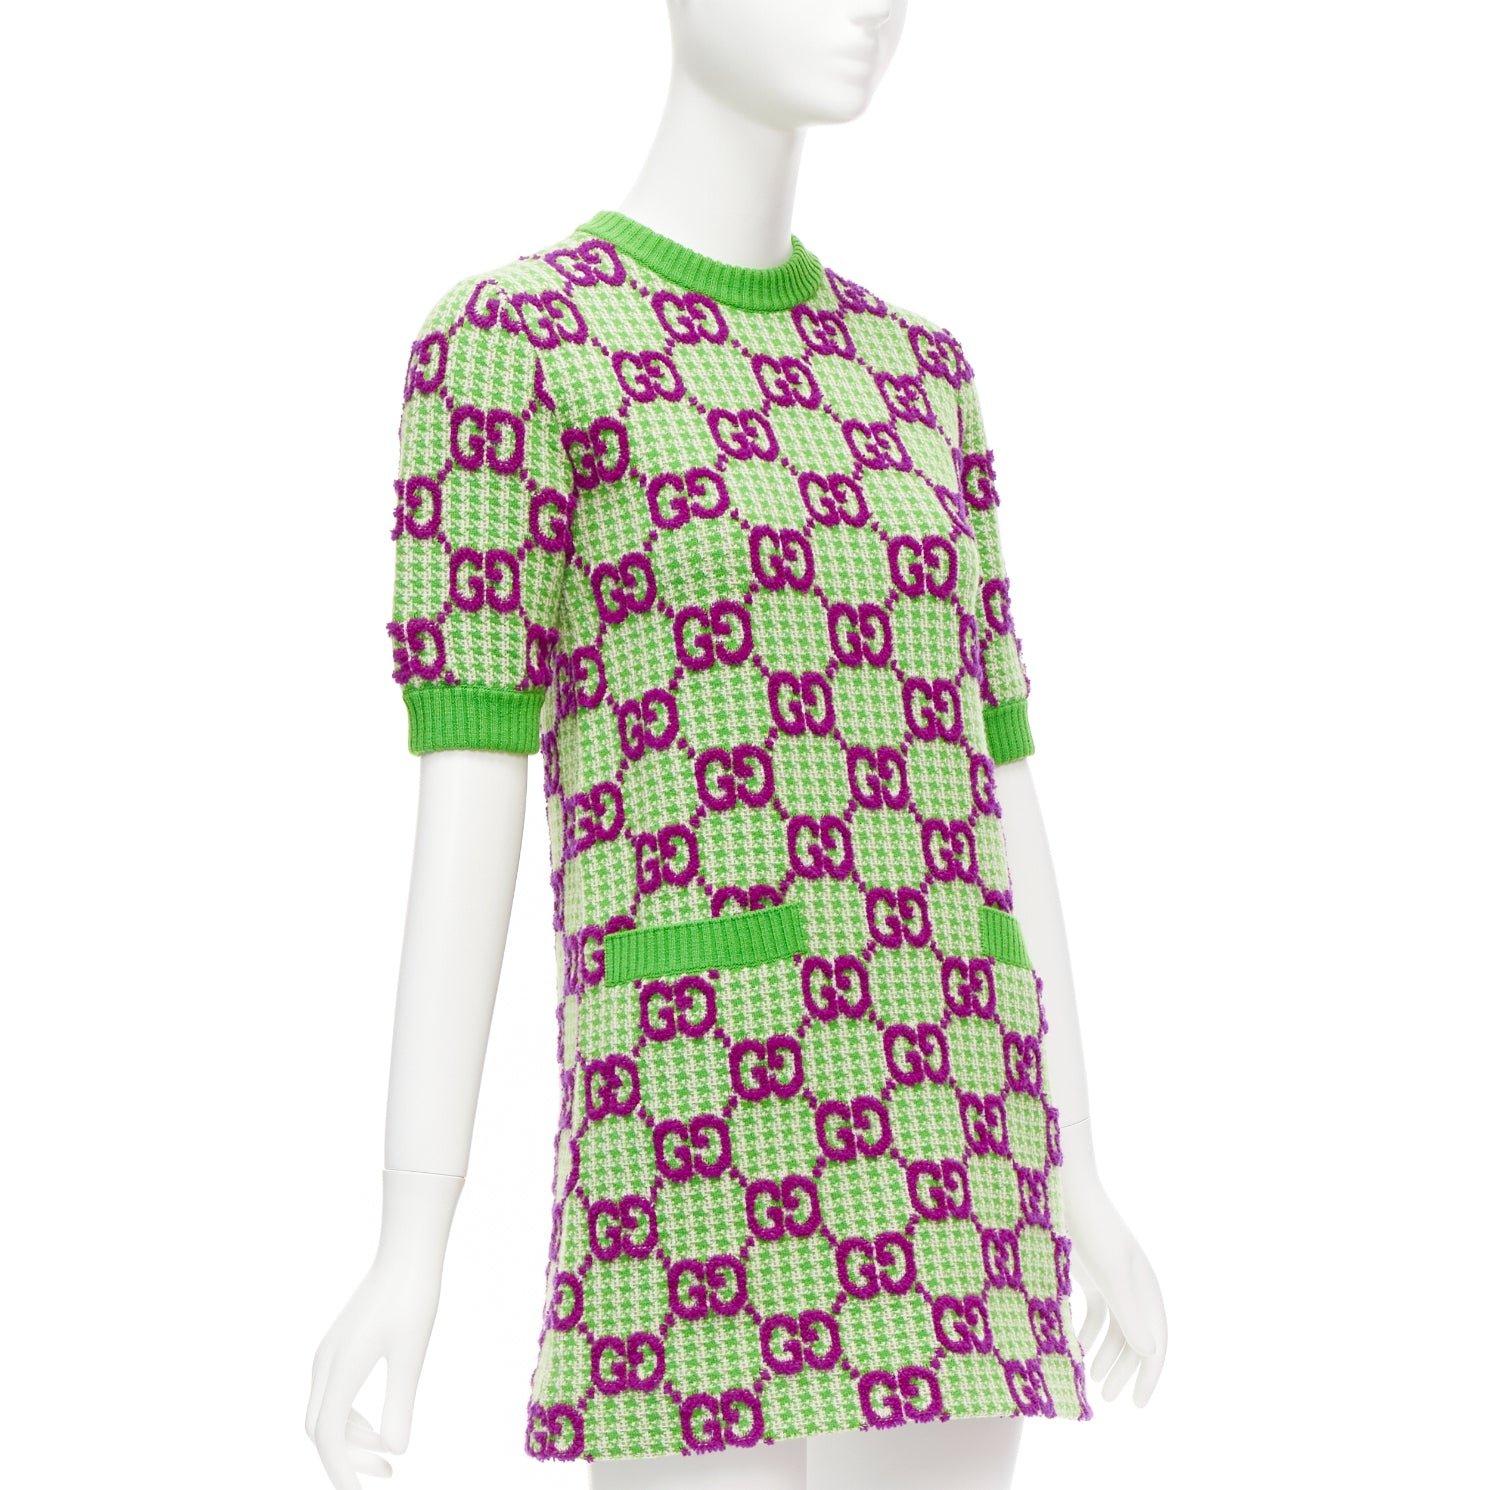 GUCCI 2022 purple green wool GG monogram jacquard crew sweater dress XXS
Reference: AAWC/A00694
Brand: Gucci
Designer: Alessandro Michele
Collection: 2022 SS
Material: Wool
Color: Green, Purple
Pattern: Monogram
Closure: Slip On
Extra Details: